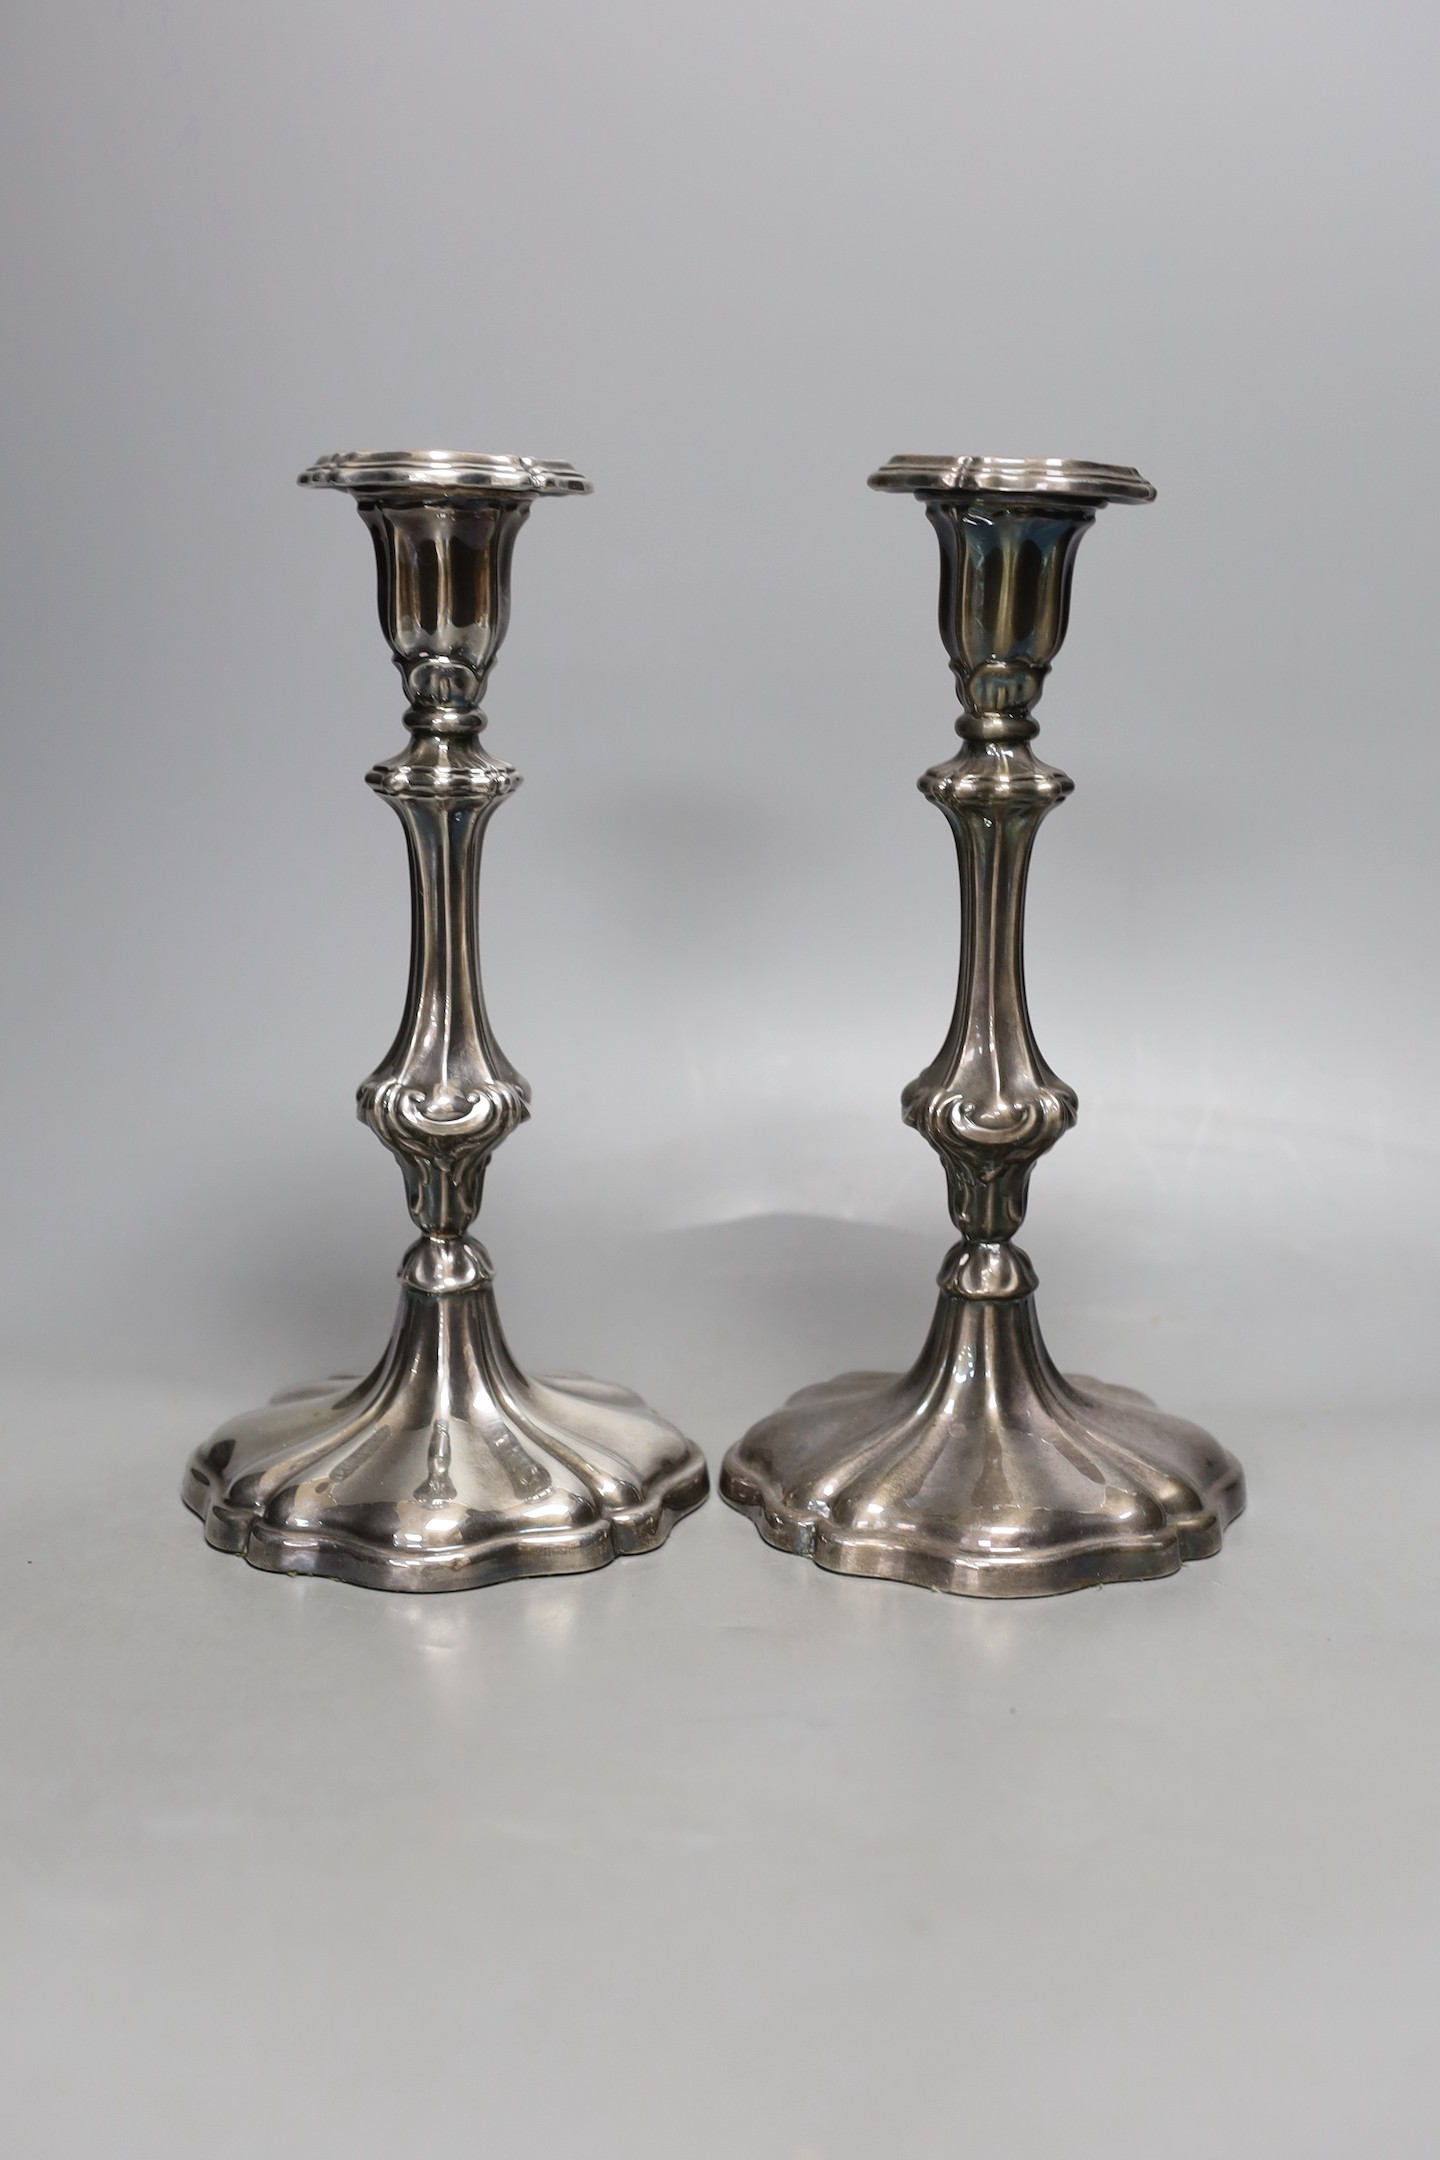 A pair of Rococo-style plated candlesticks - 24cm tall